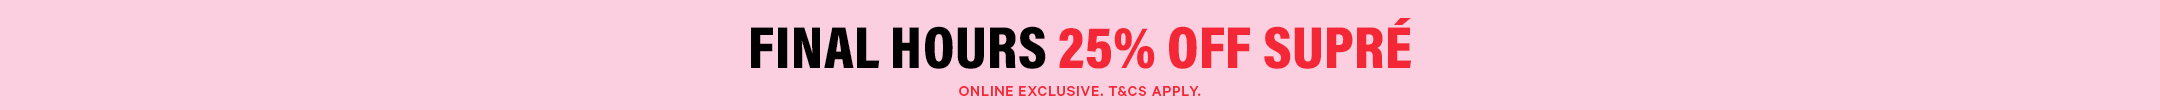 Last Chance to Shop 25% Off Supre